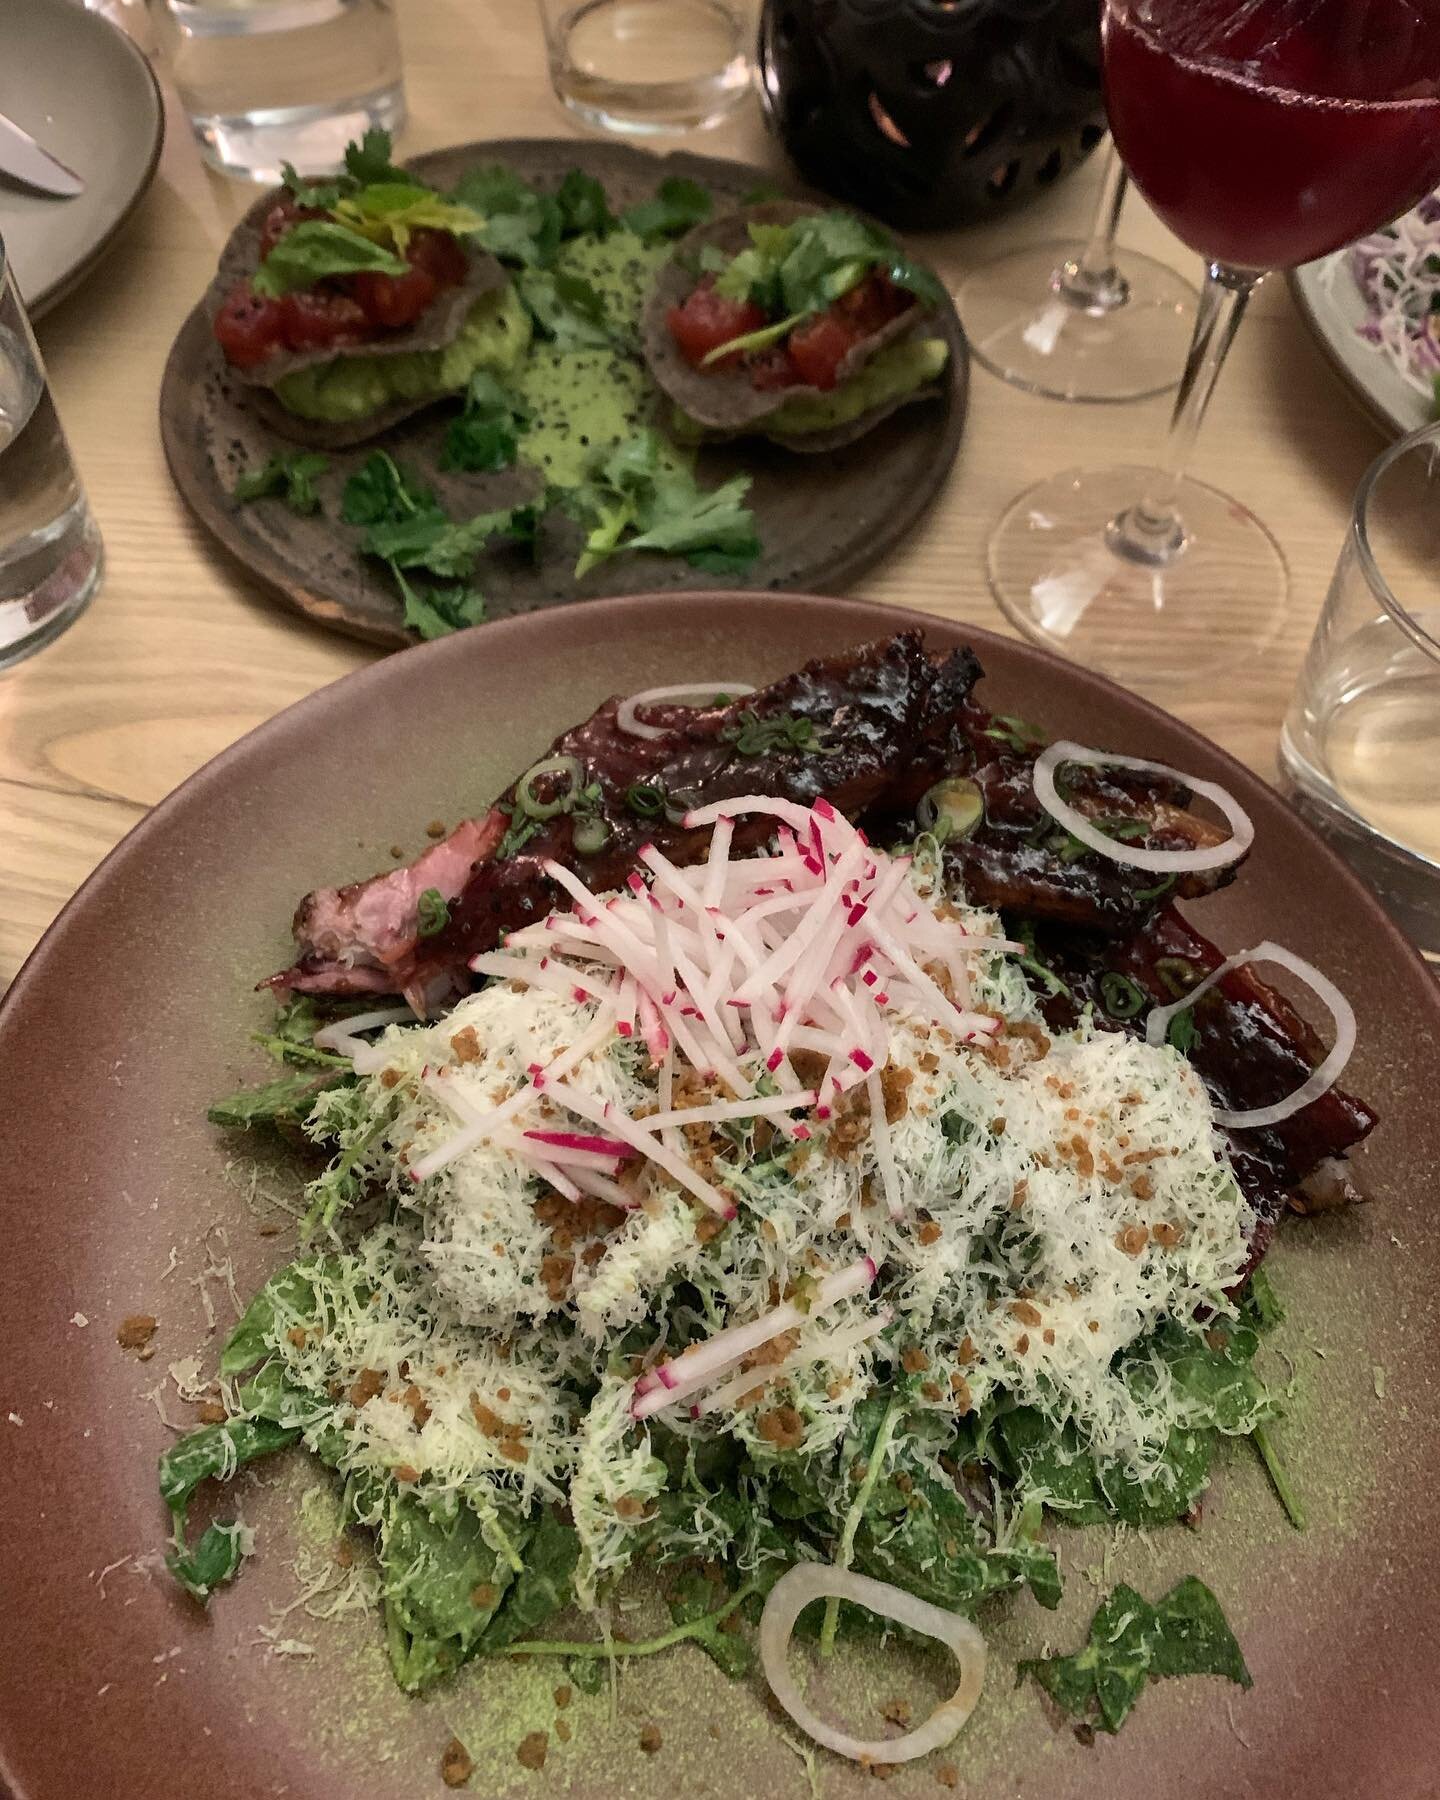 Always a delicious time at @colitarestaurant 😋 look closely &amp; you&rsquo;ll even see that I snagged a bite of their succulent ribs before snapping a photo! 🤫